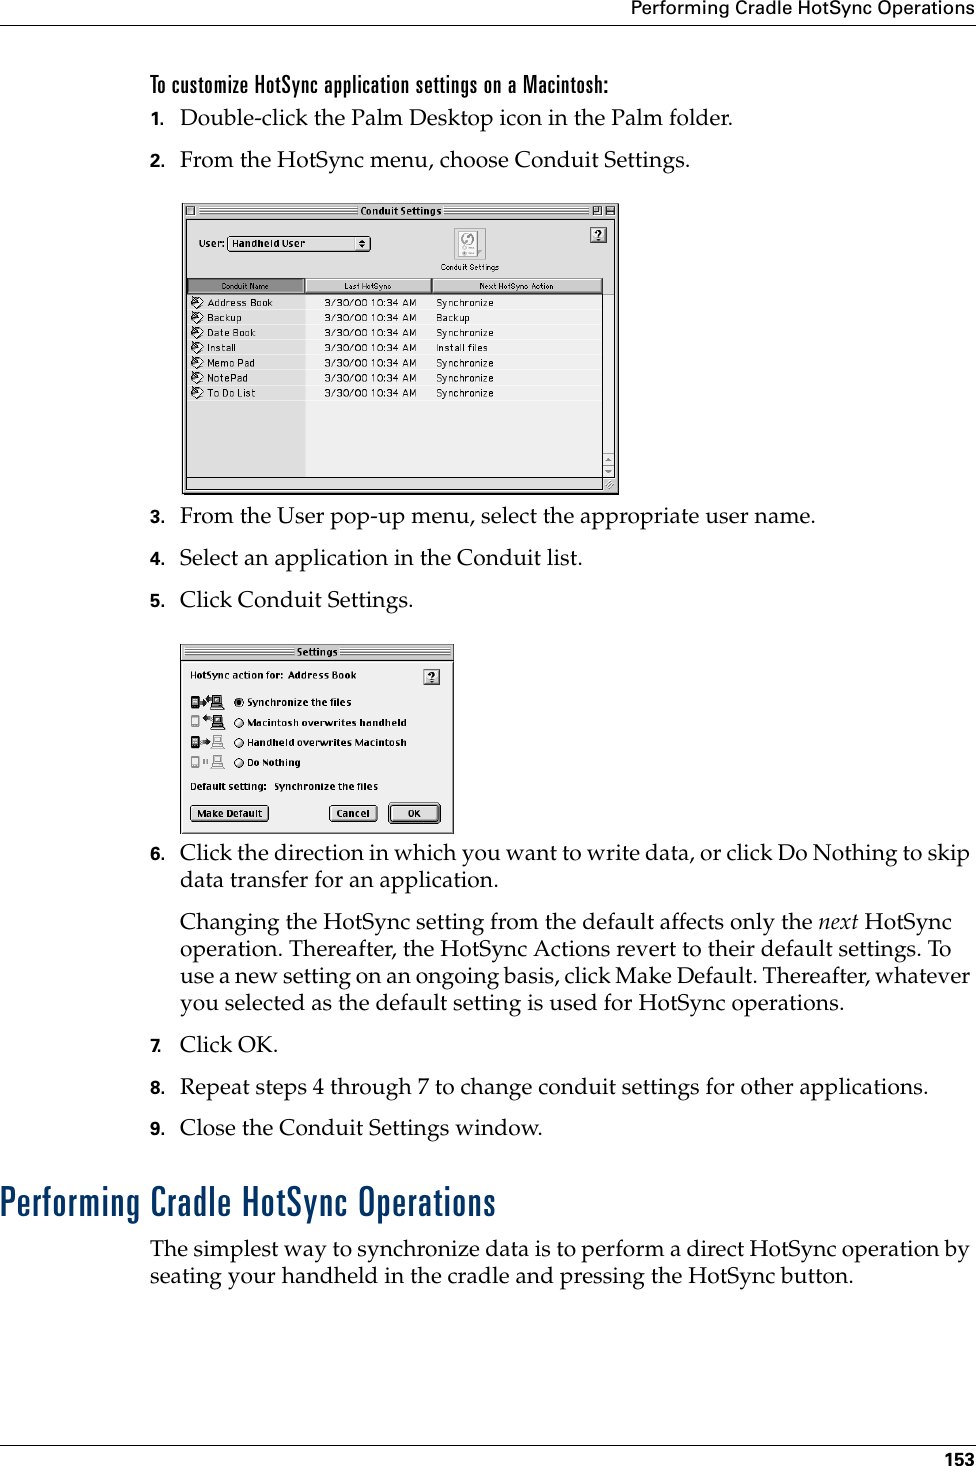 Performing Cradle HotSync Operations153To customize HotSync application settings on a Macintosh:1. Double-click the Palm Desktop icon in the Palm folder.2. From the HotSync menu, choose Conduit Settings.3. From the User pop-up menu, select the appropriate user name.4. Select an application in the Conduit list.5. Click Conduit Settings.6. Click the direction in which you want to write data, or click Do Nothing to skip data transfer for an application.Changing the HotSync setting from the default affects only the next HotSync operation. Thereafter, the HotSync Actions revert to their default settings. To use a new setting on an ongoing basis, click Make Default. Thereafter, whatever you selected as the default setting is used for HotSync operations.7. Click OK.8. Repeat steps 4 through 7 to change conduit settings for other applications.9. Close the Conduit Settings window.Performing Cradle HotSync OperationsThe simplest way to synchronize data is to perform a direct HotSync operation by seating your handheld in the cradle and pressing the HotSync button.